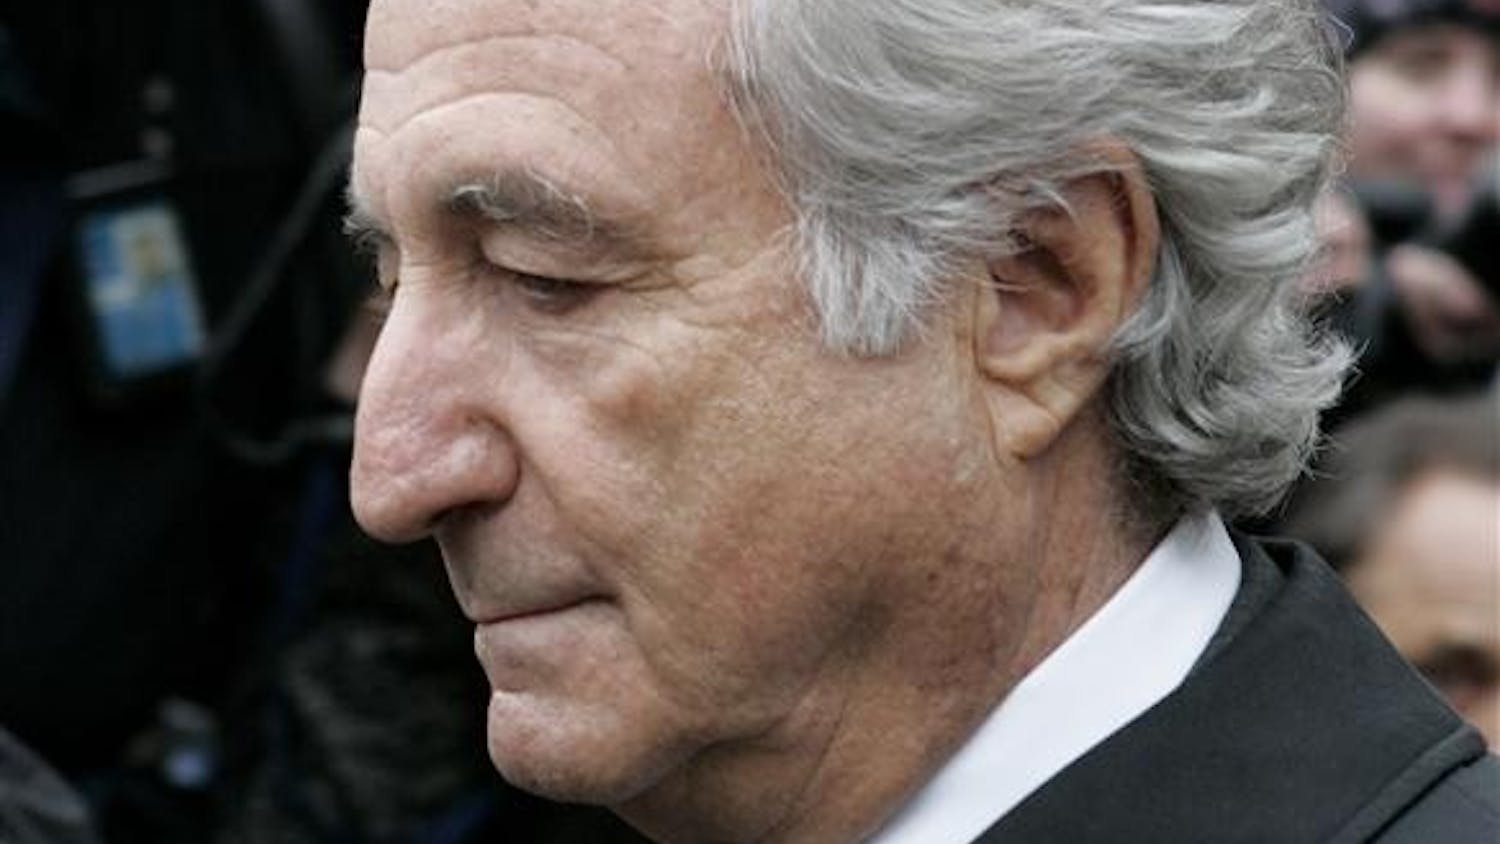 In this March 10, 2009, photo, Bernard Madoff exits Manhattan federal court in New York. U.S. District Judge Denny Chin said Monday that the federal probation department recommends that Madoff get 50 years in prison.